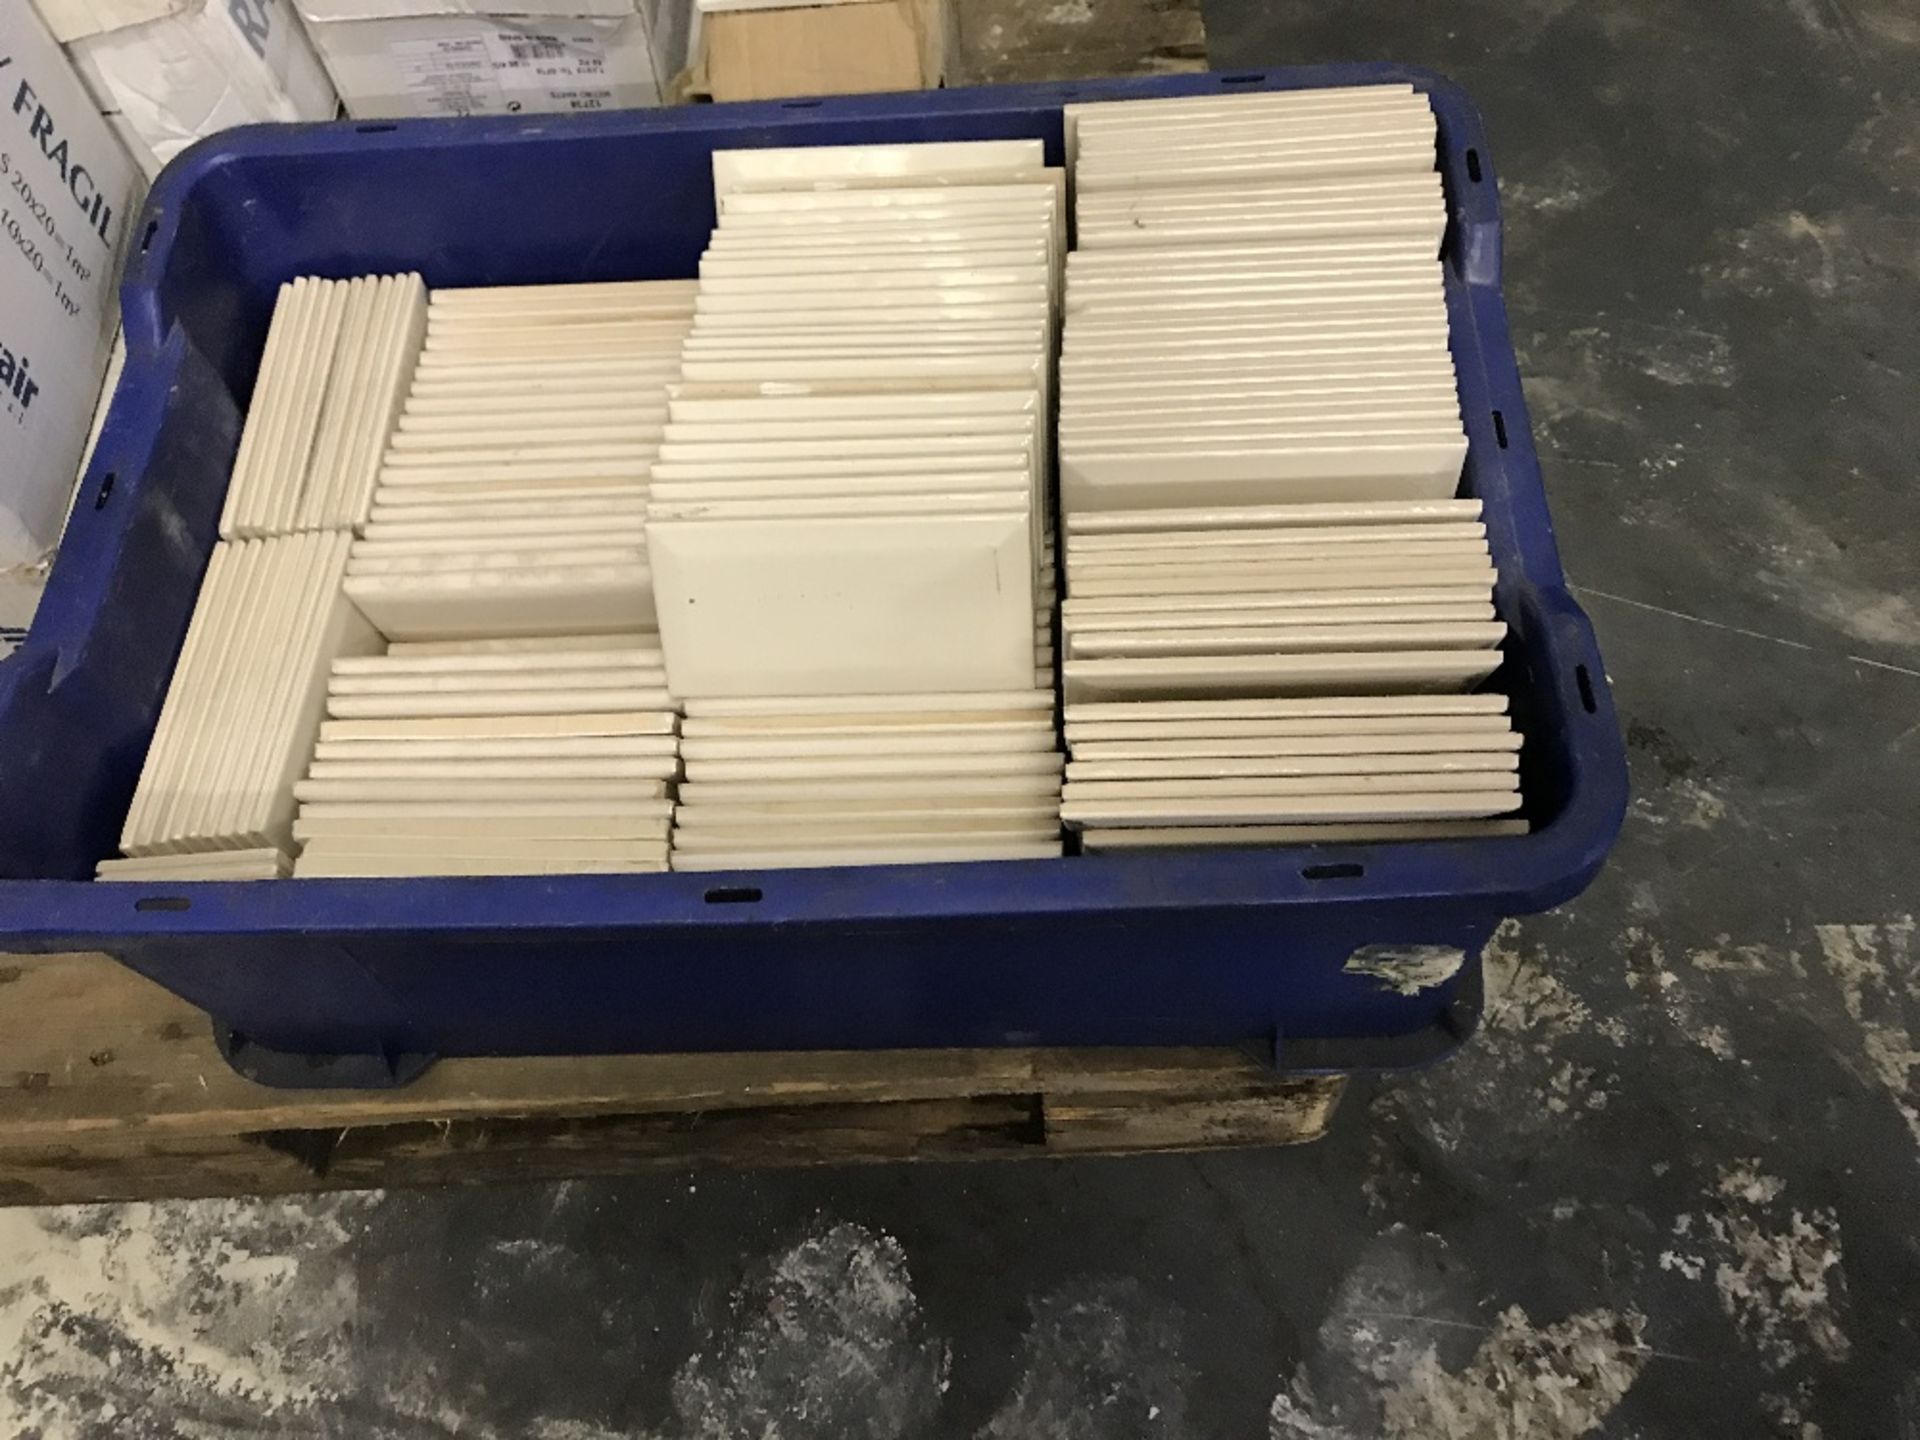 2 crates of tiles